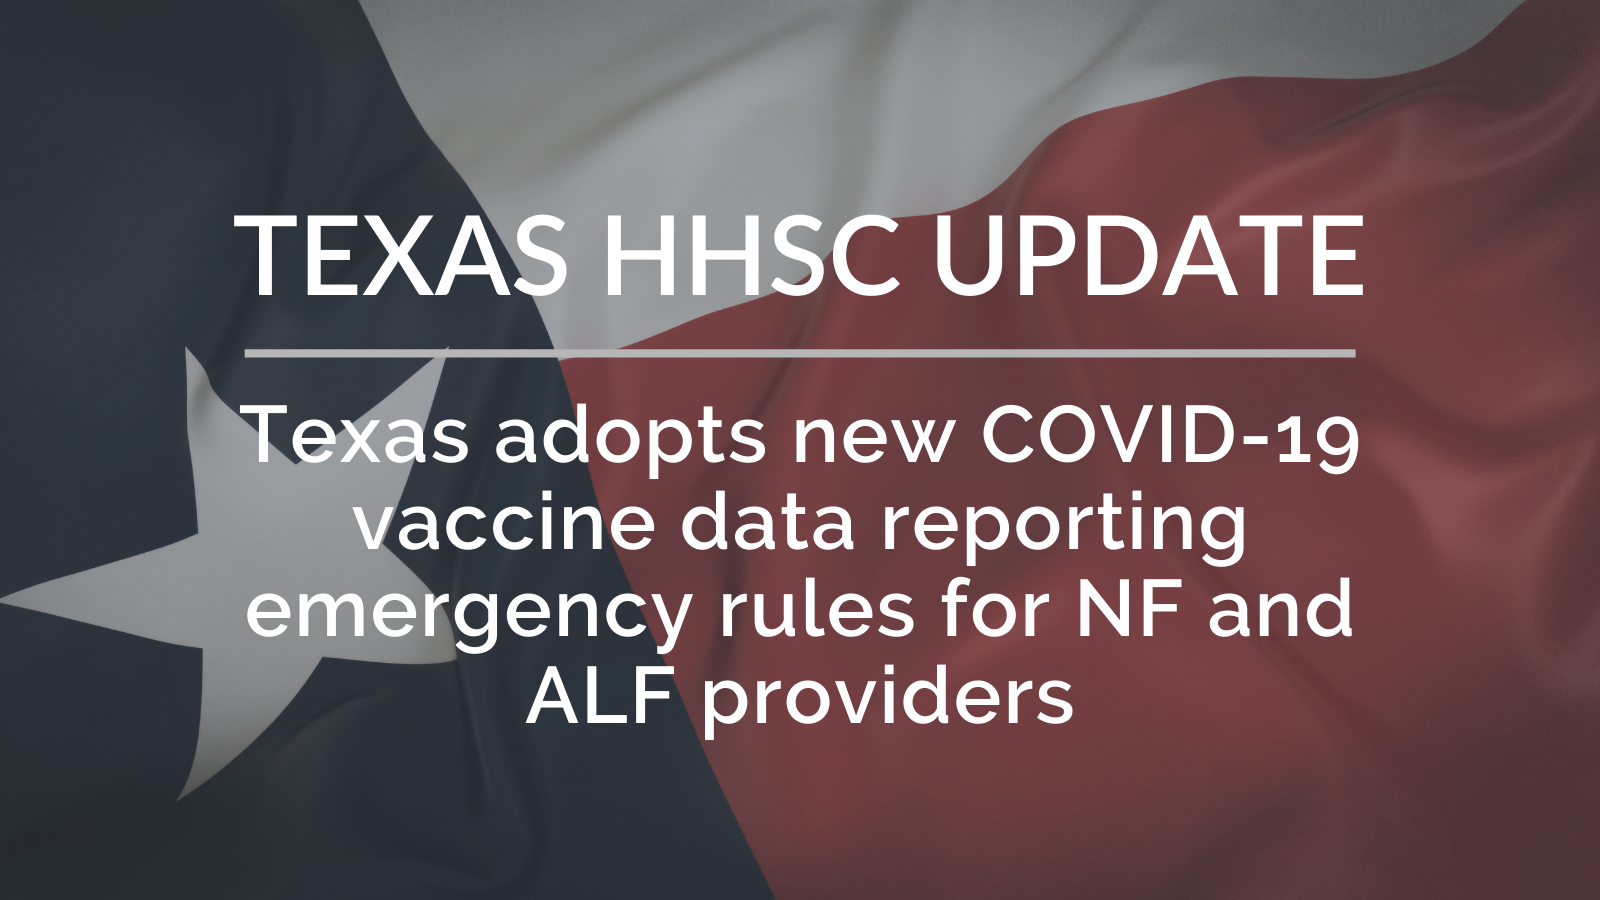 Texas adopts new COVID19 vaccination data reporting emergency rules